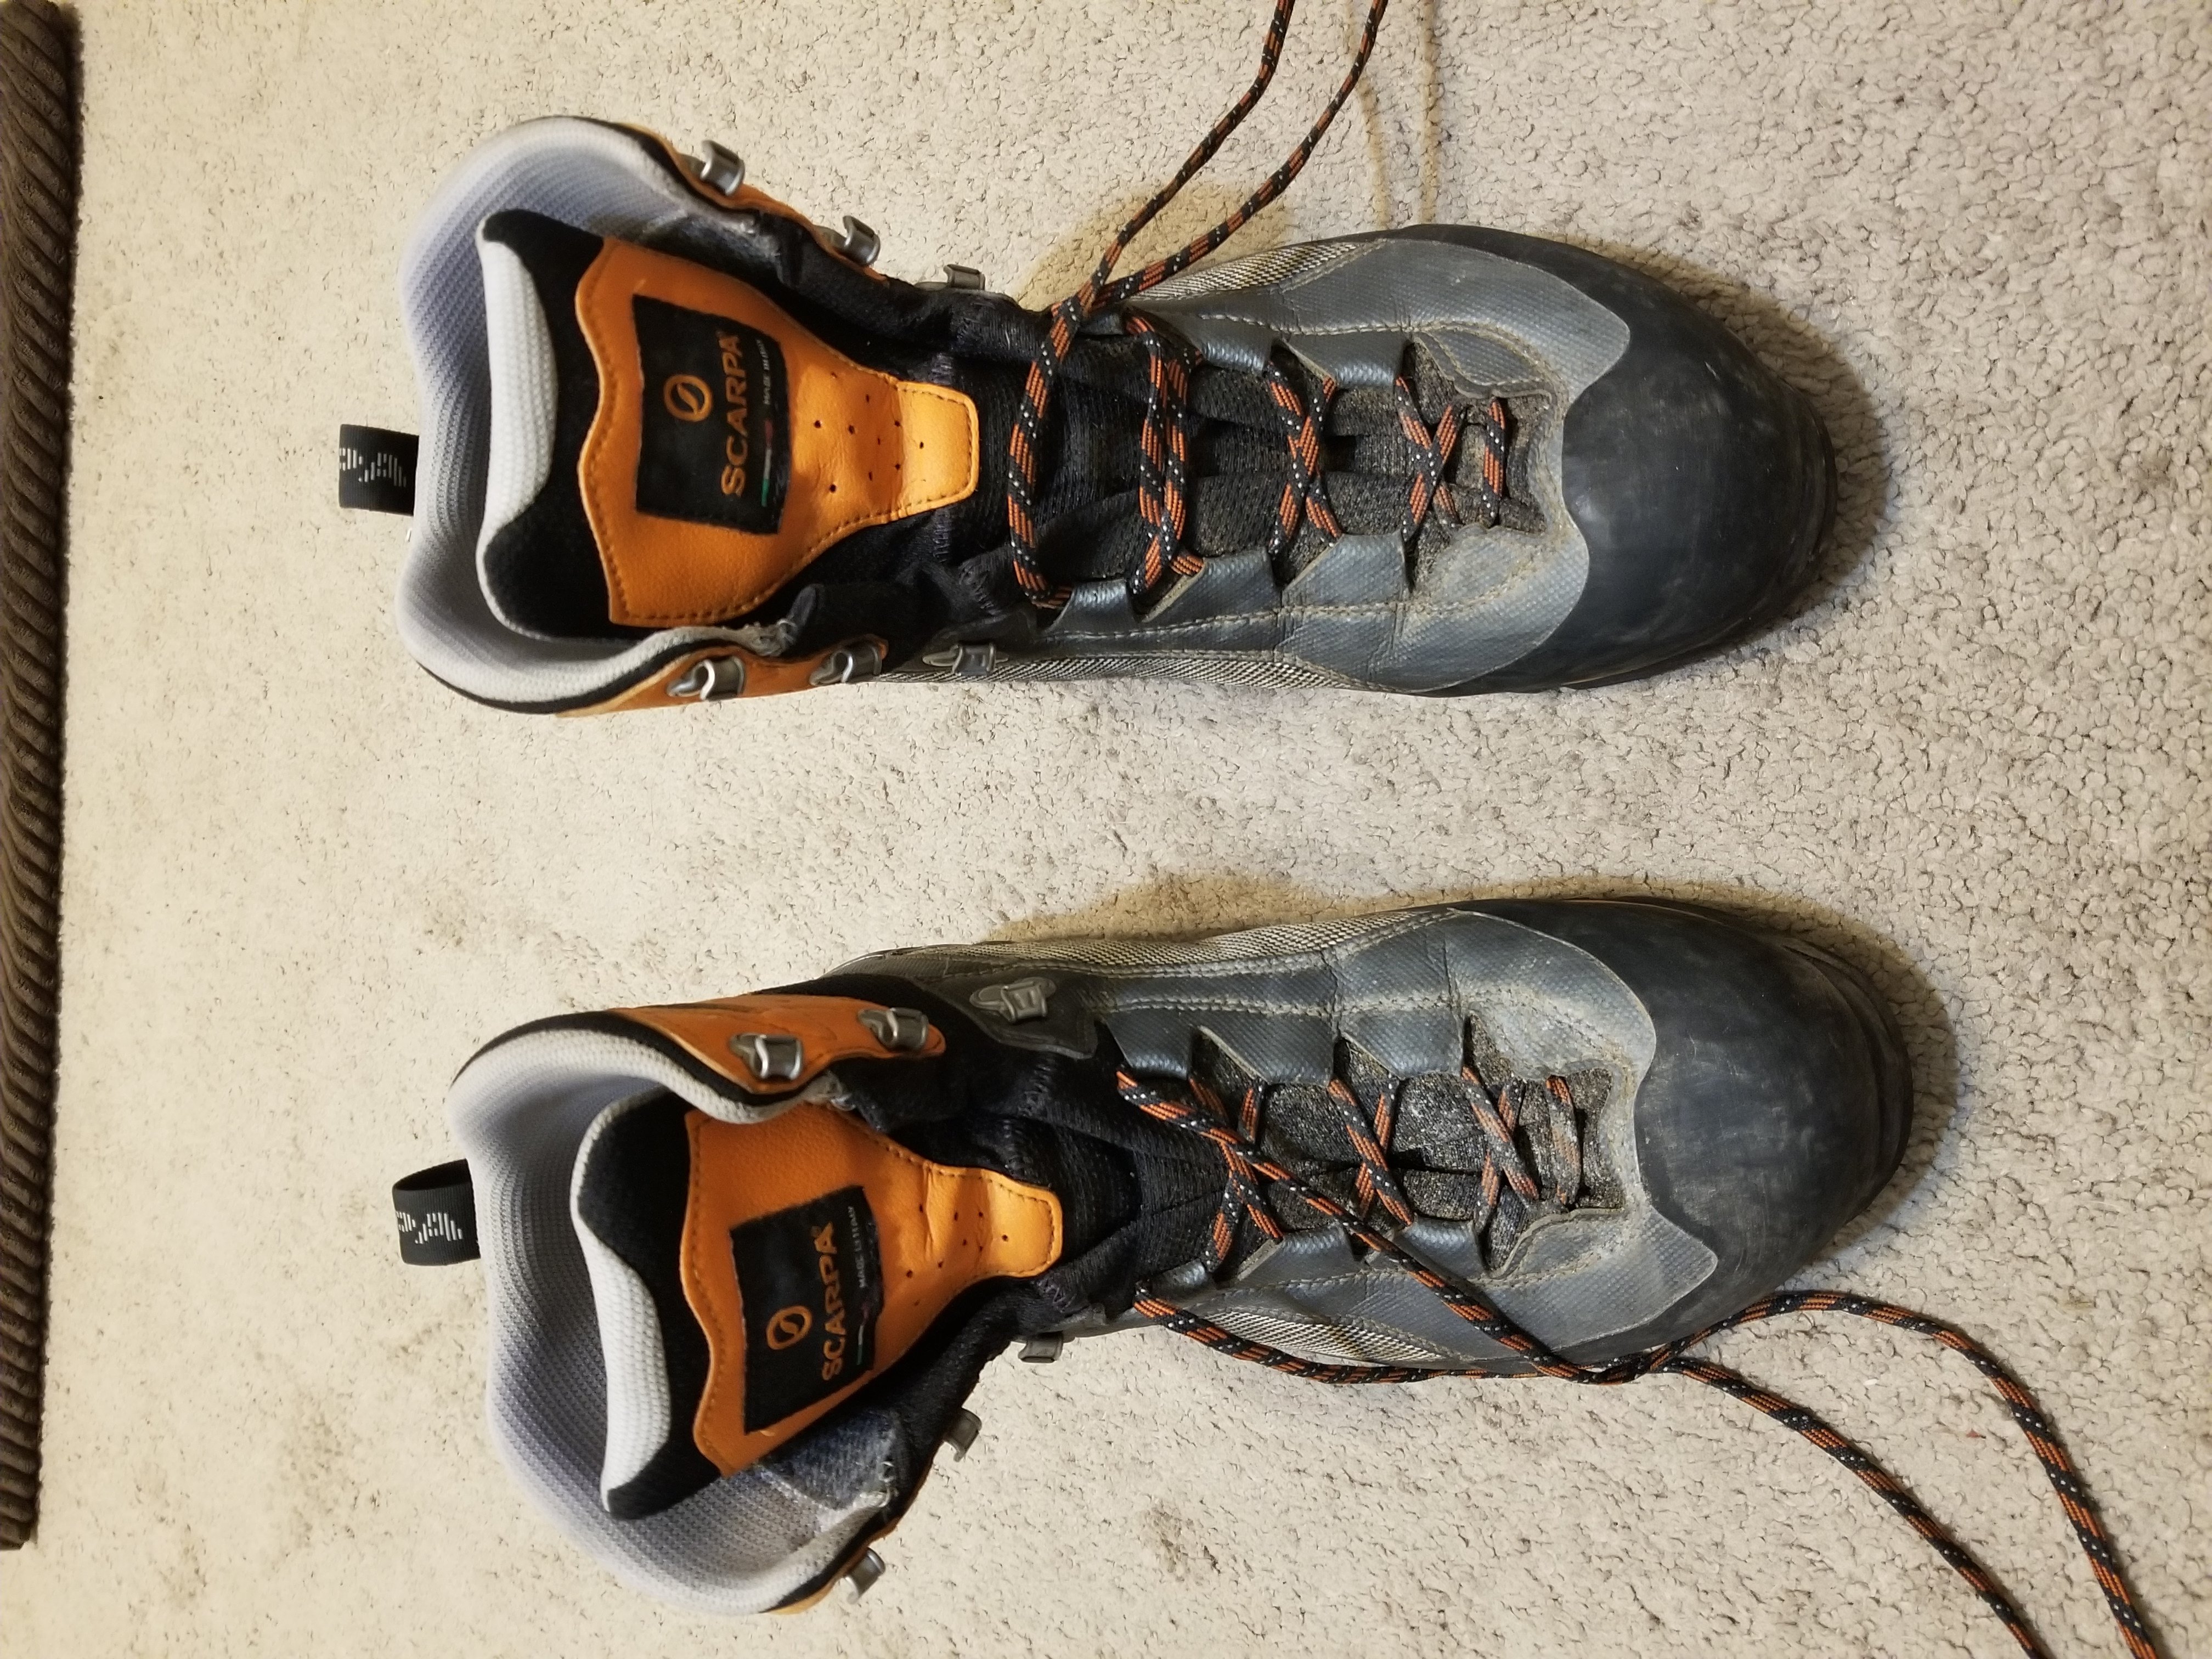 FS: Scarpa boots - Classified Ads - CouesWhitetail.com Discussion forum